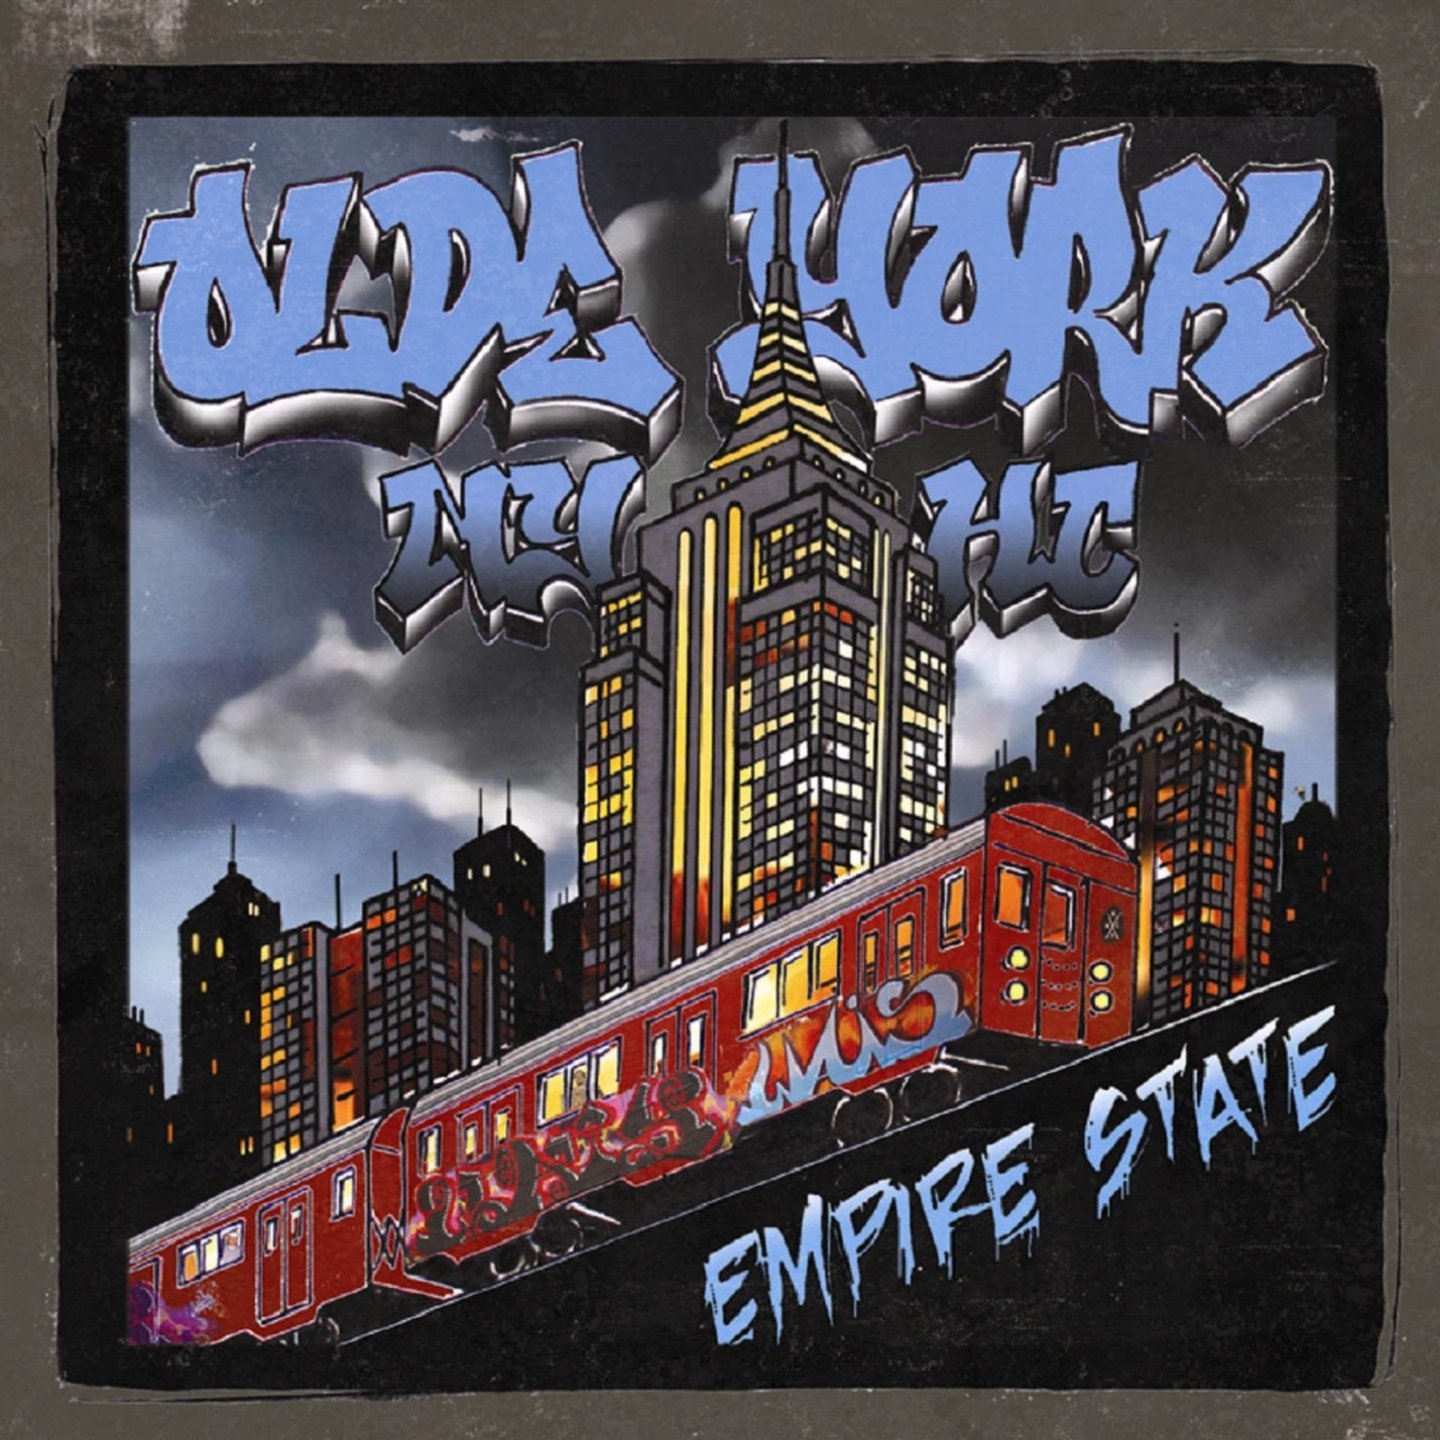 Olde York - Empire State (2009) FLAC Download